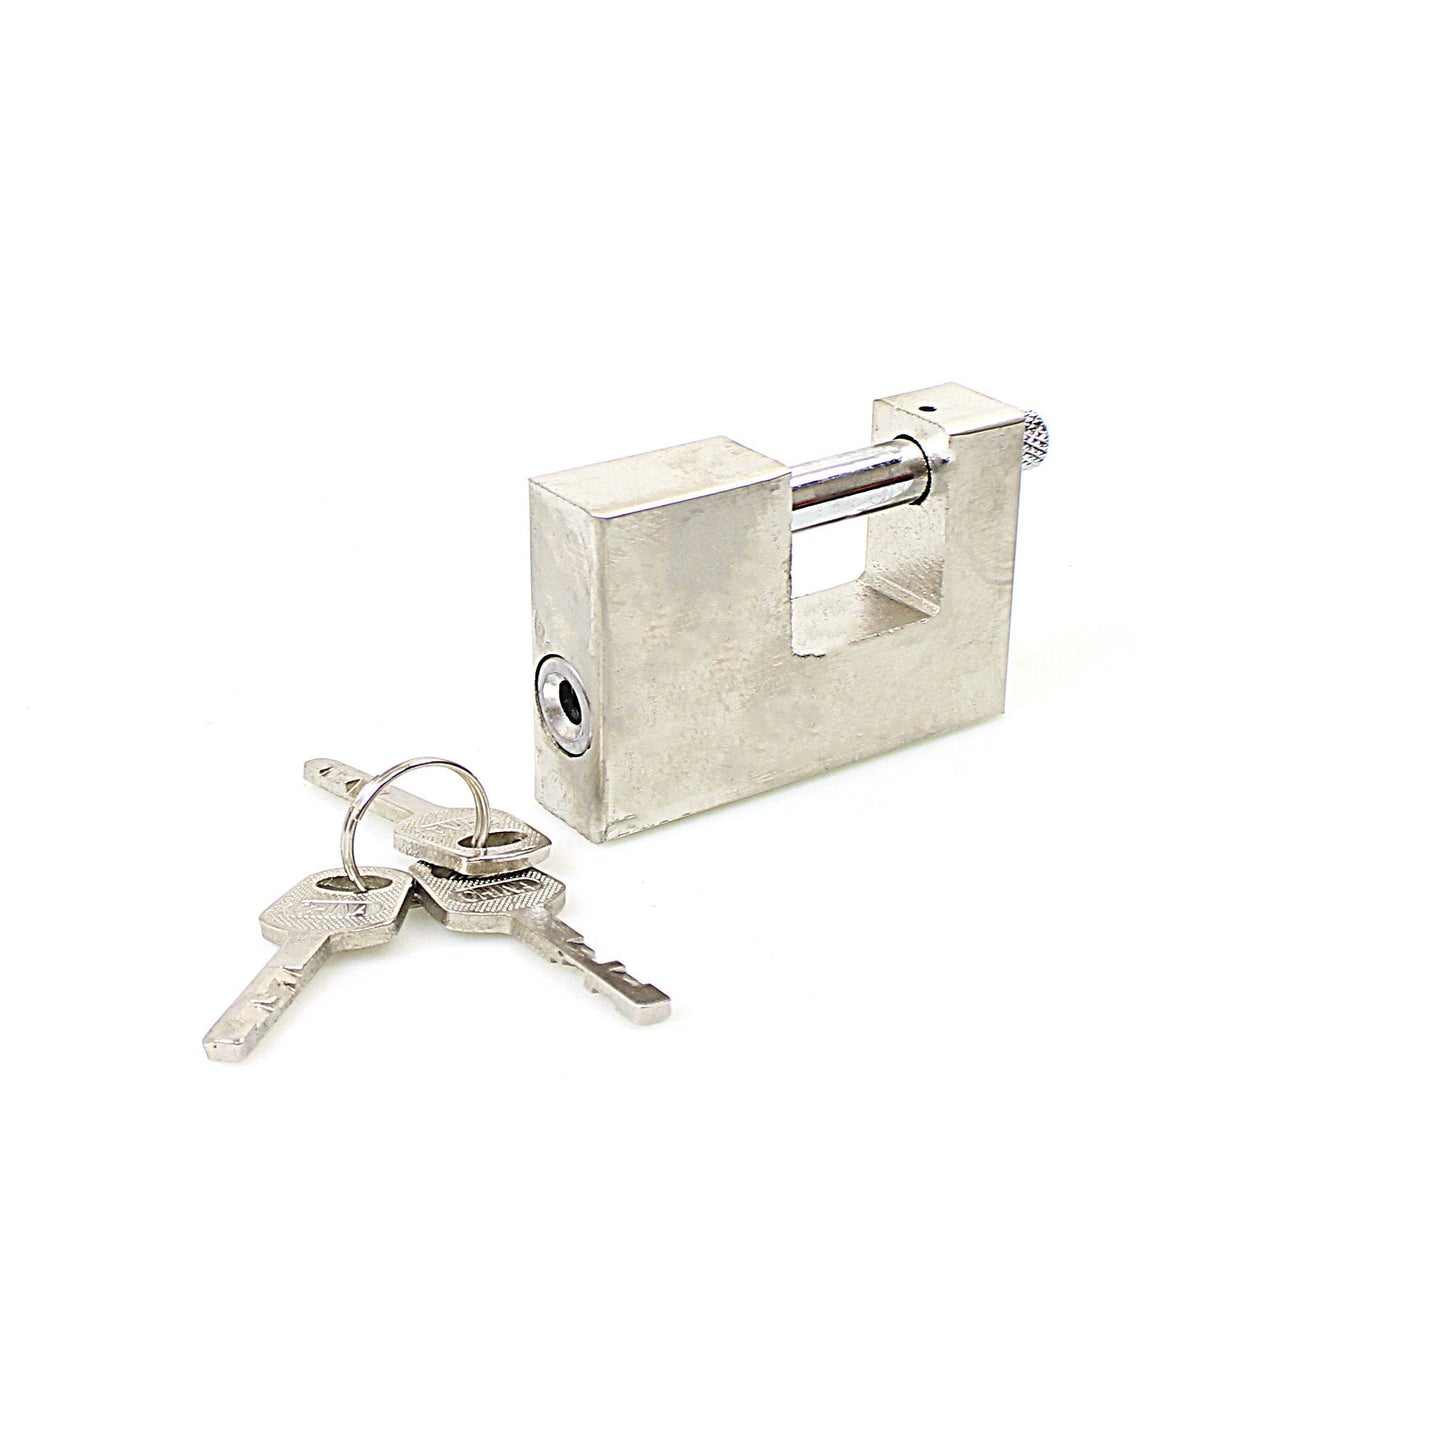 New Heavy Duty World Ball Lock 3 Keys Attached  0252 (Parcel Rate)